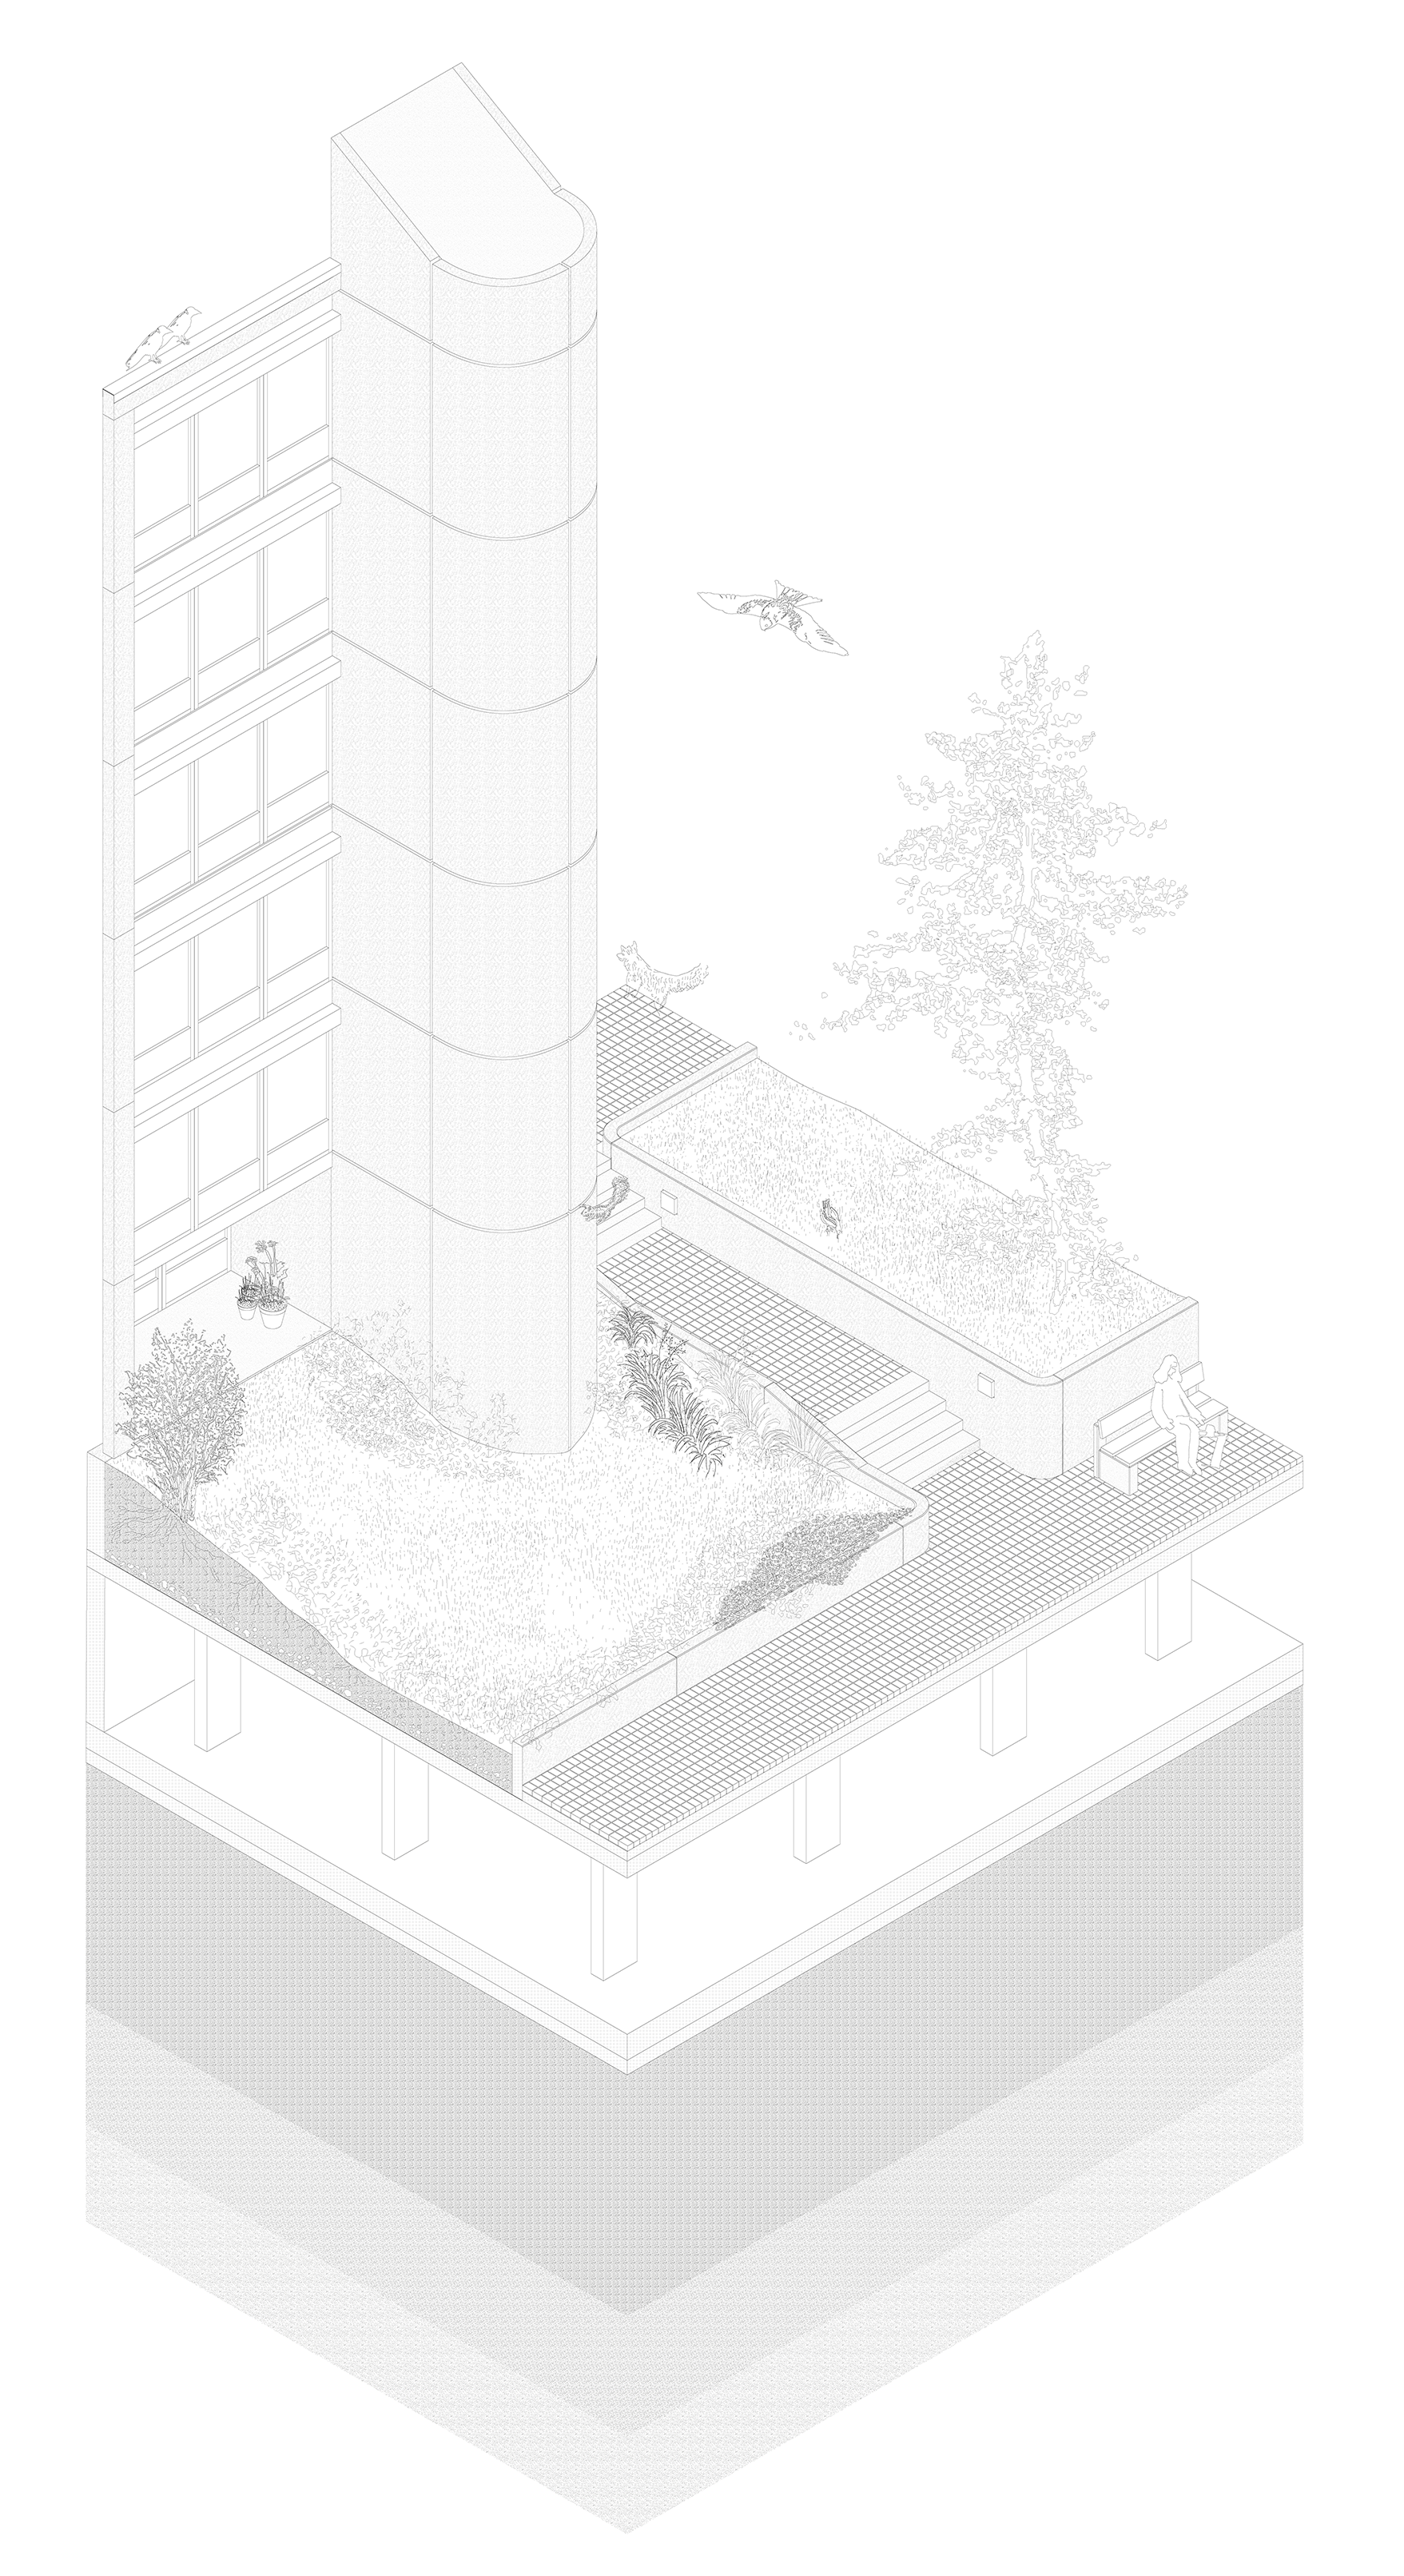 Axonometric section, illustrating the artificial ground of the biotope